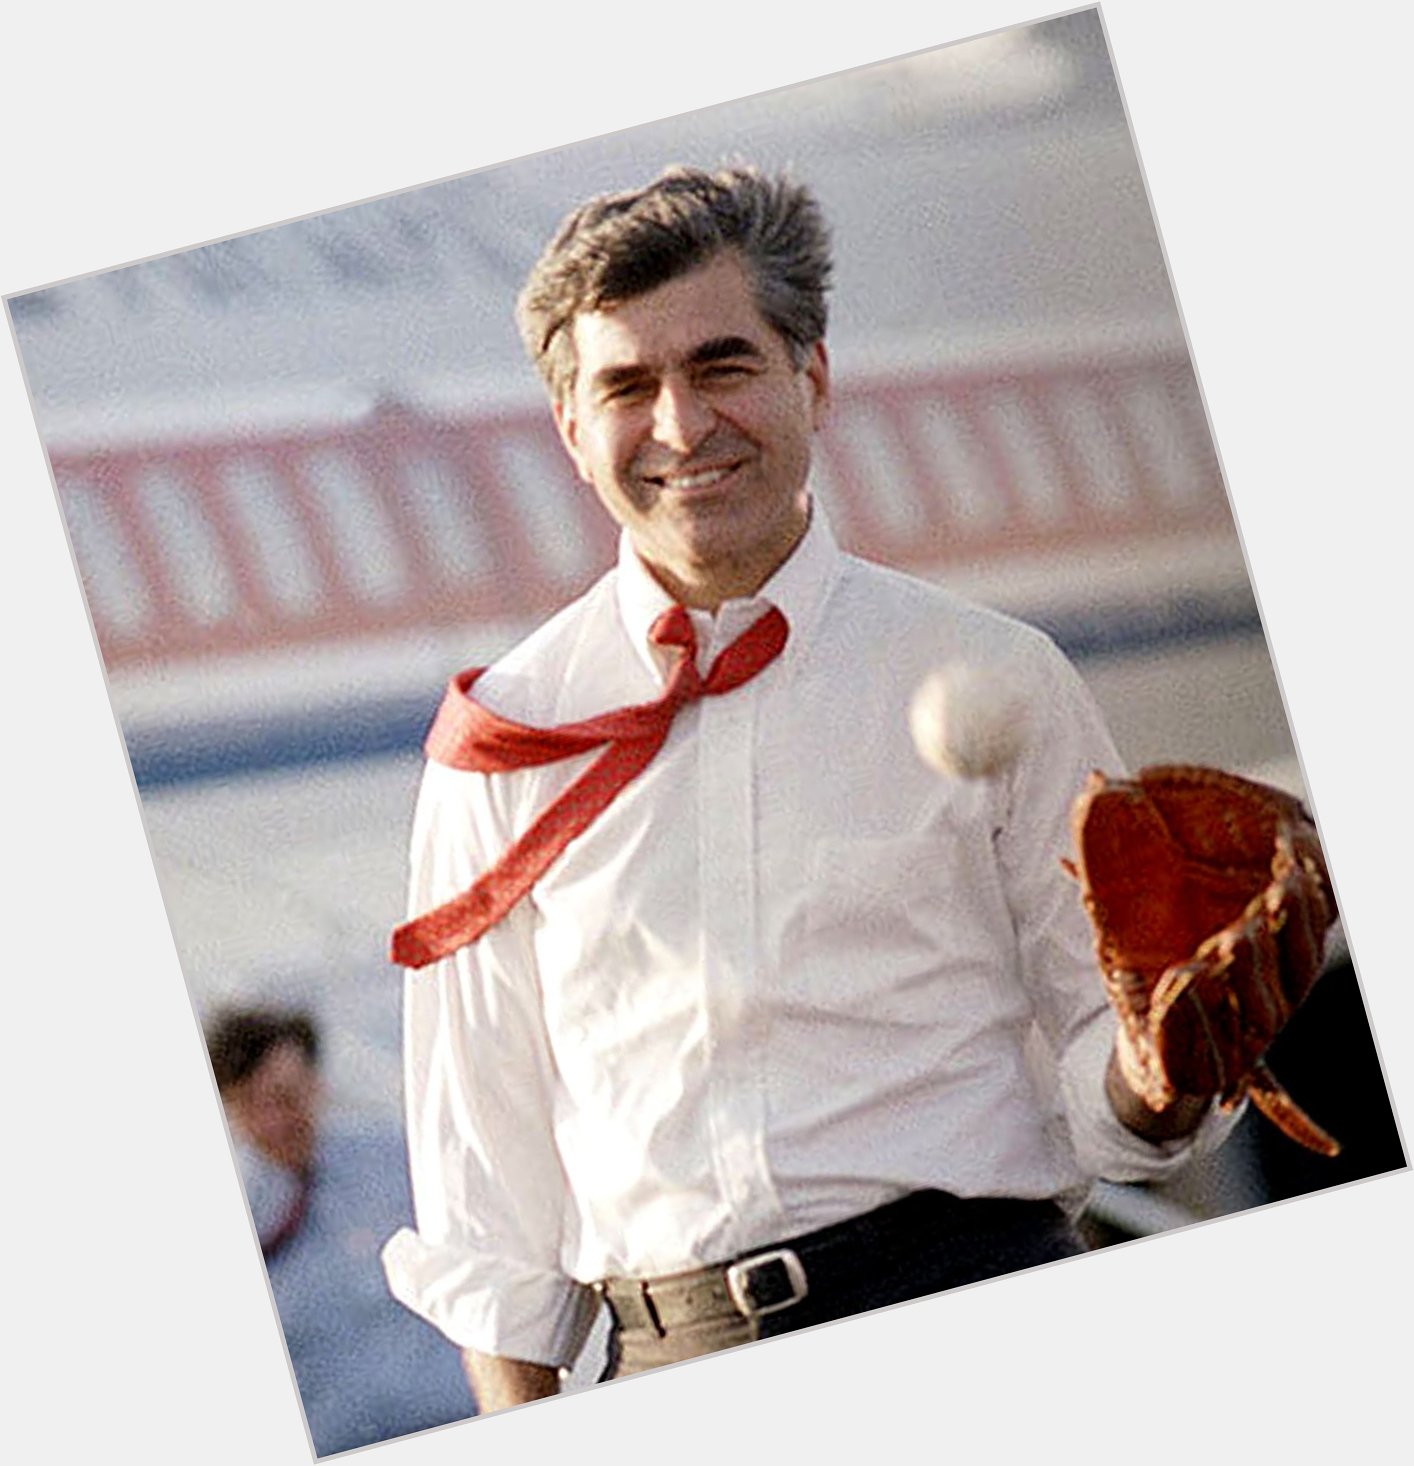 A very happy 88th birthday to Governor Michael Dukakis! 